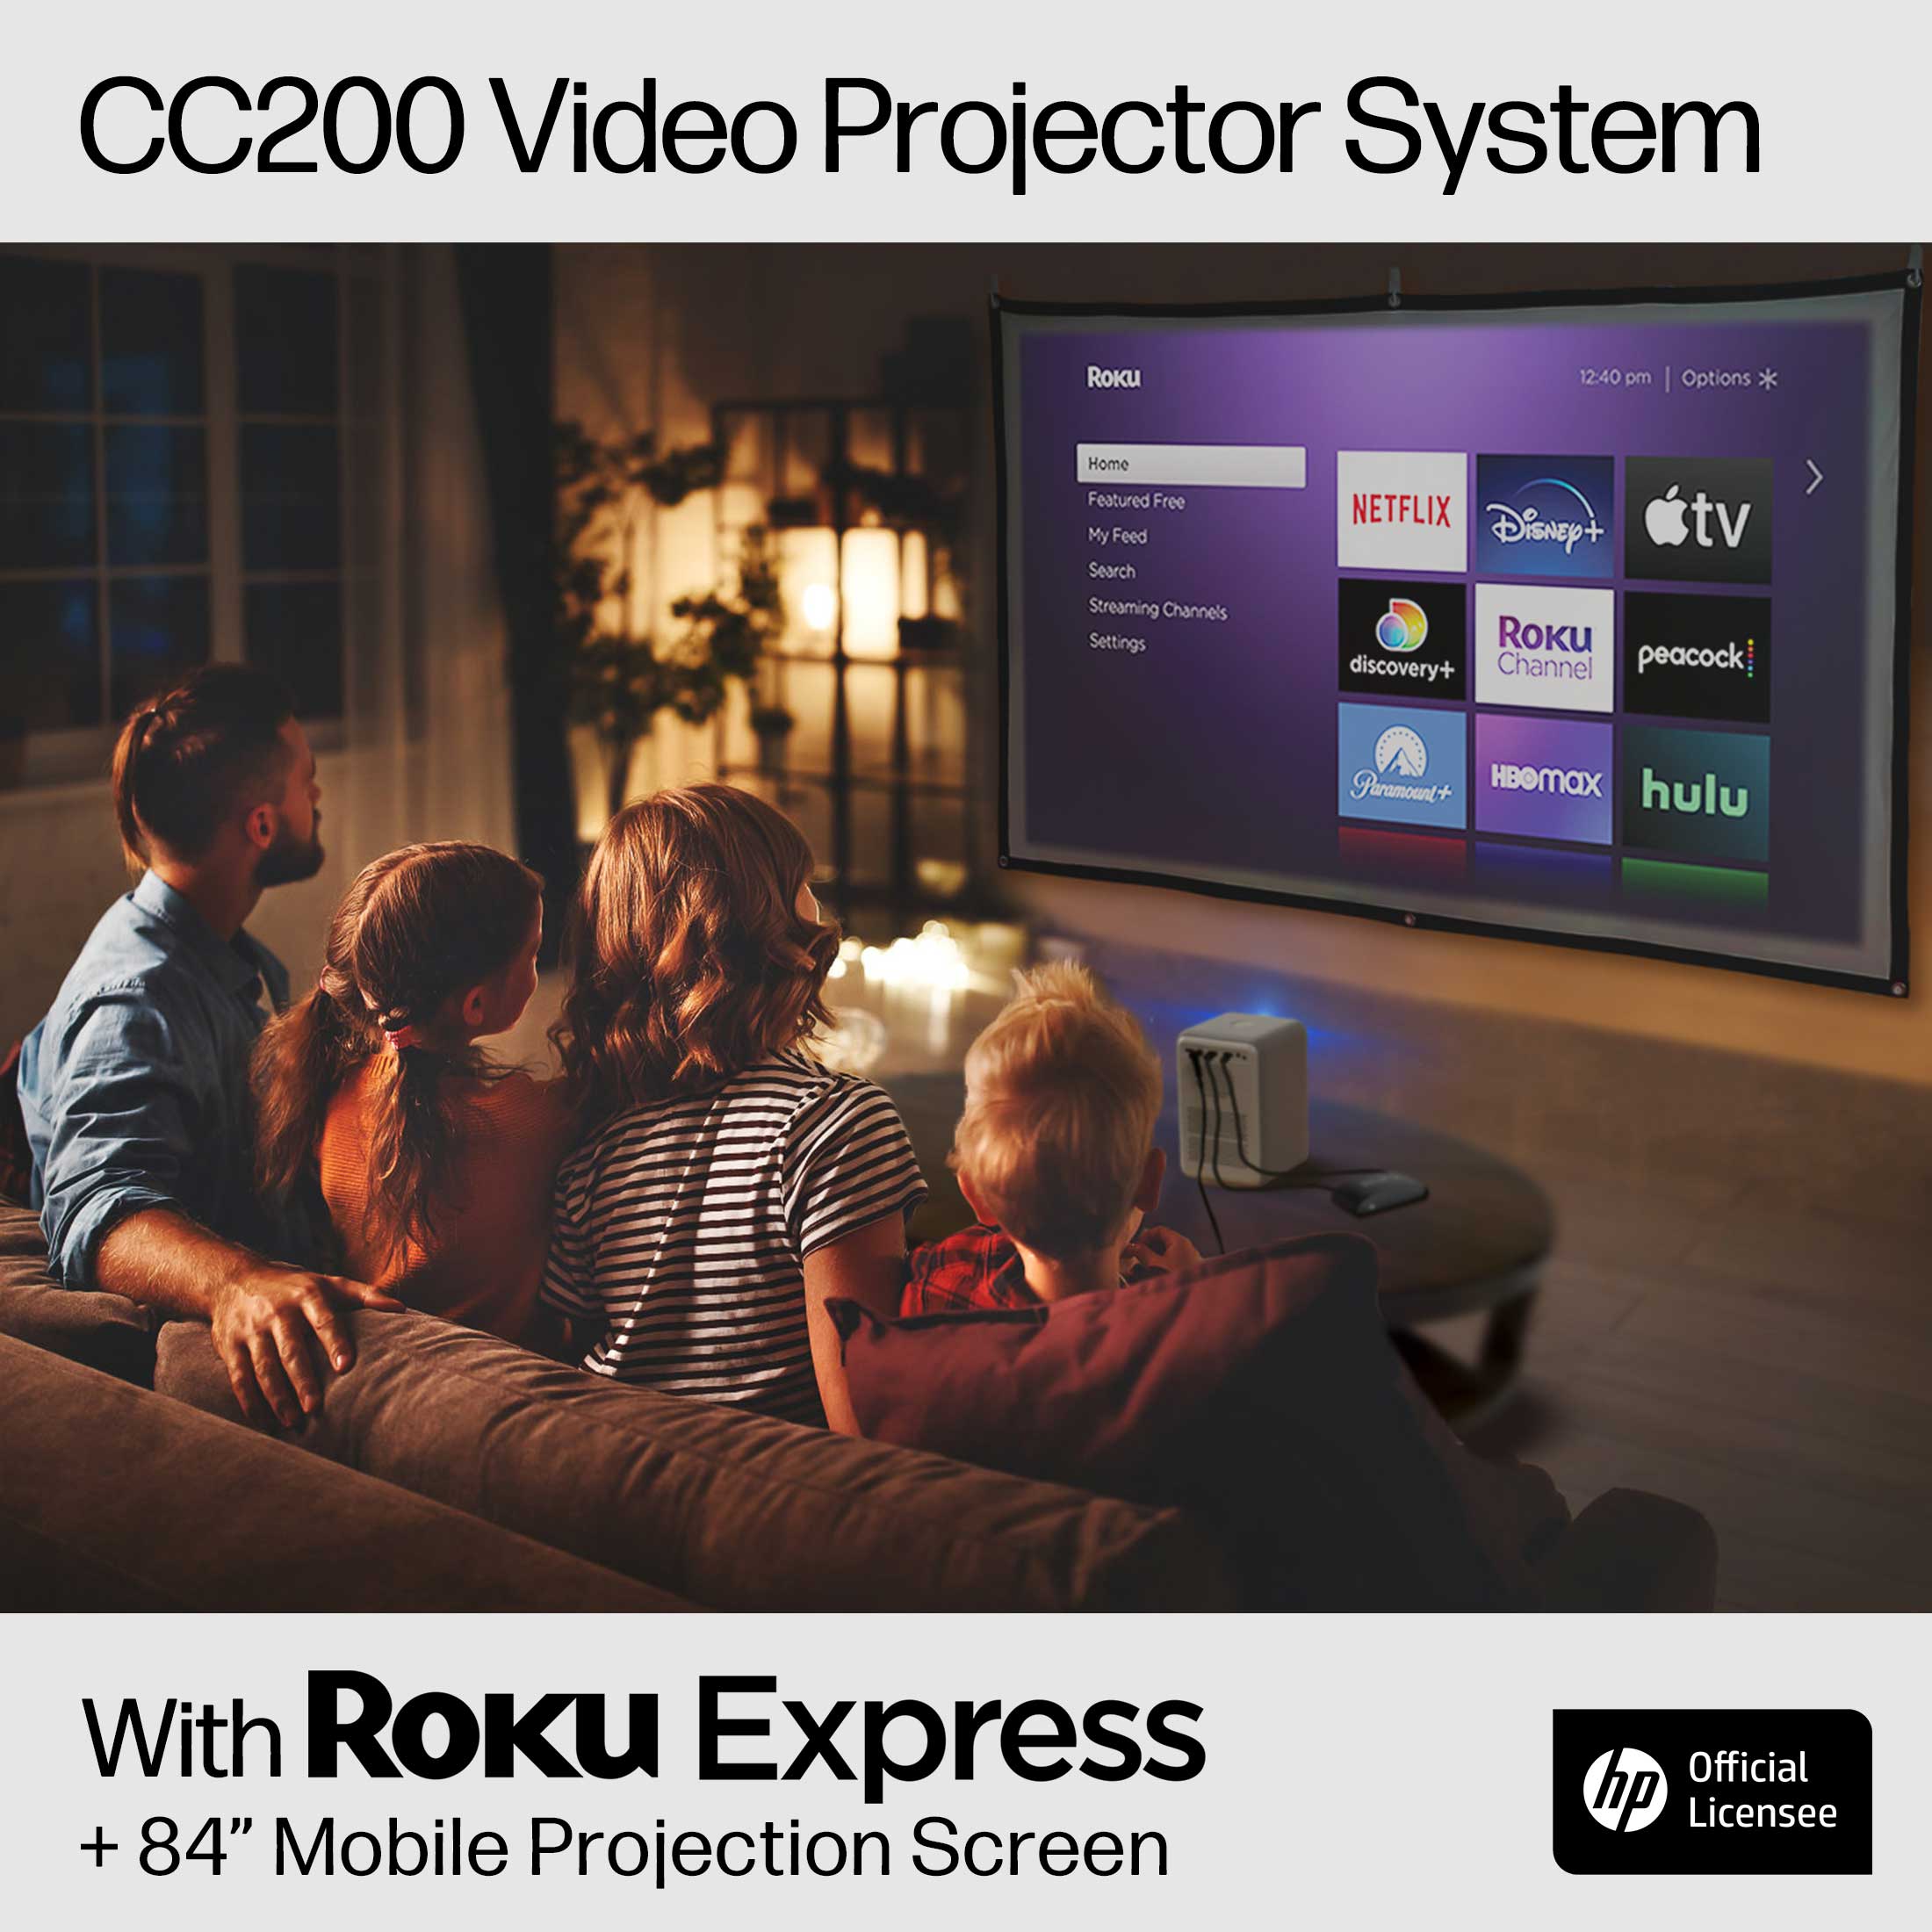 HP CC200 FHD LCD LED Projector with Roku Express Streaming Player and 84" Mobile Projection Screen - image 3 of 16